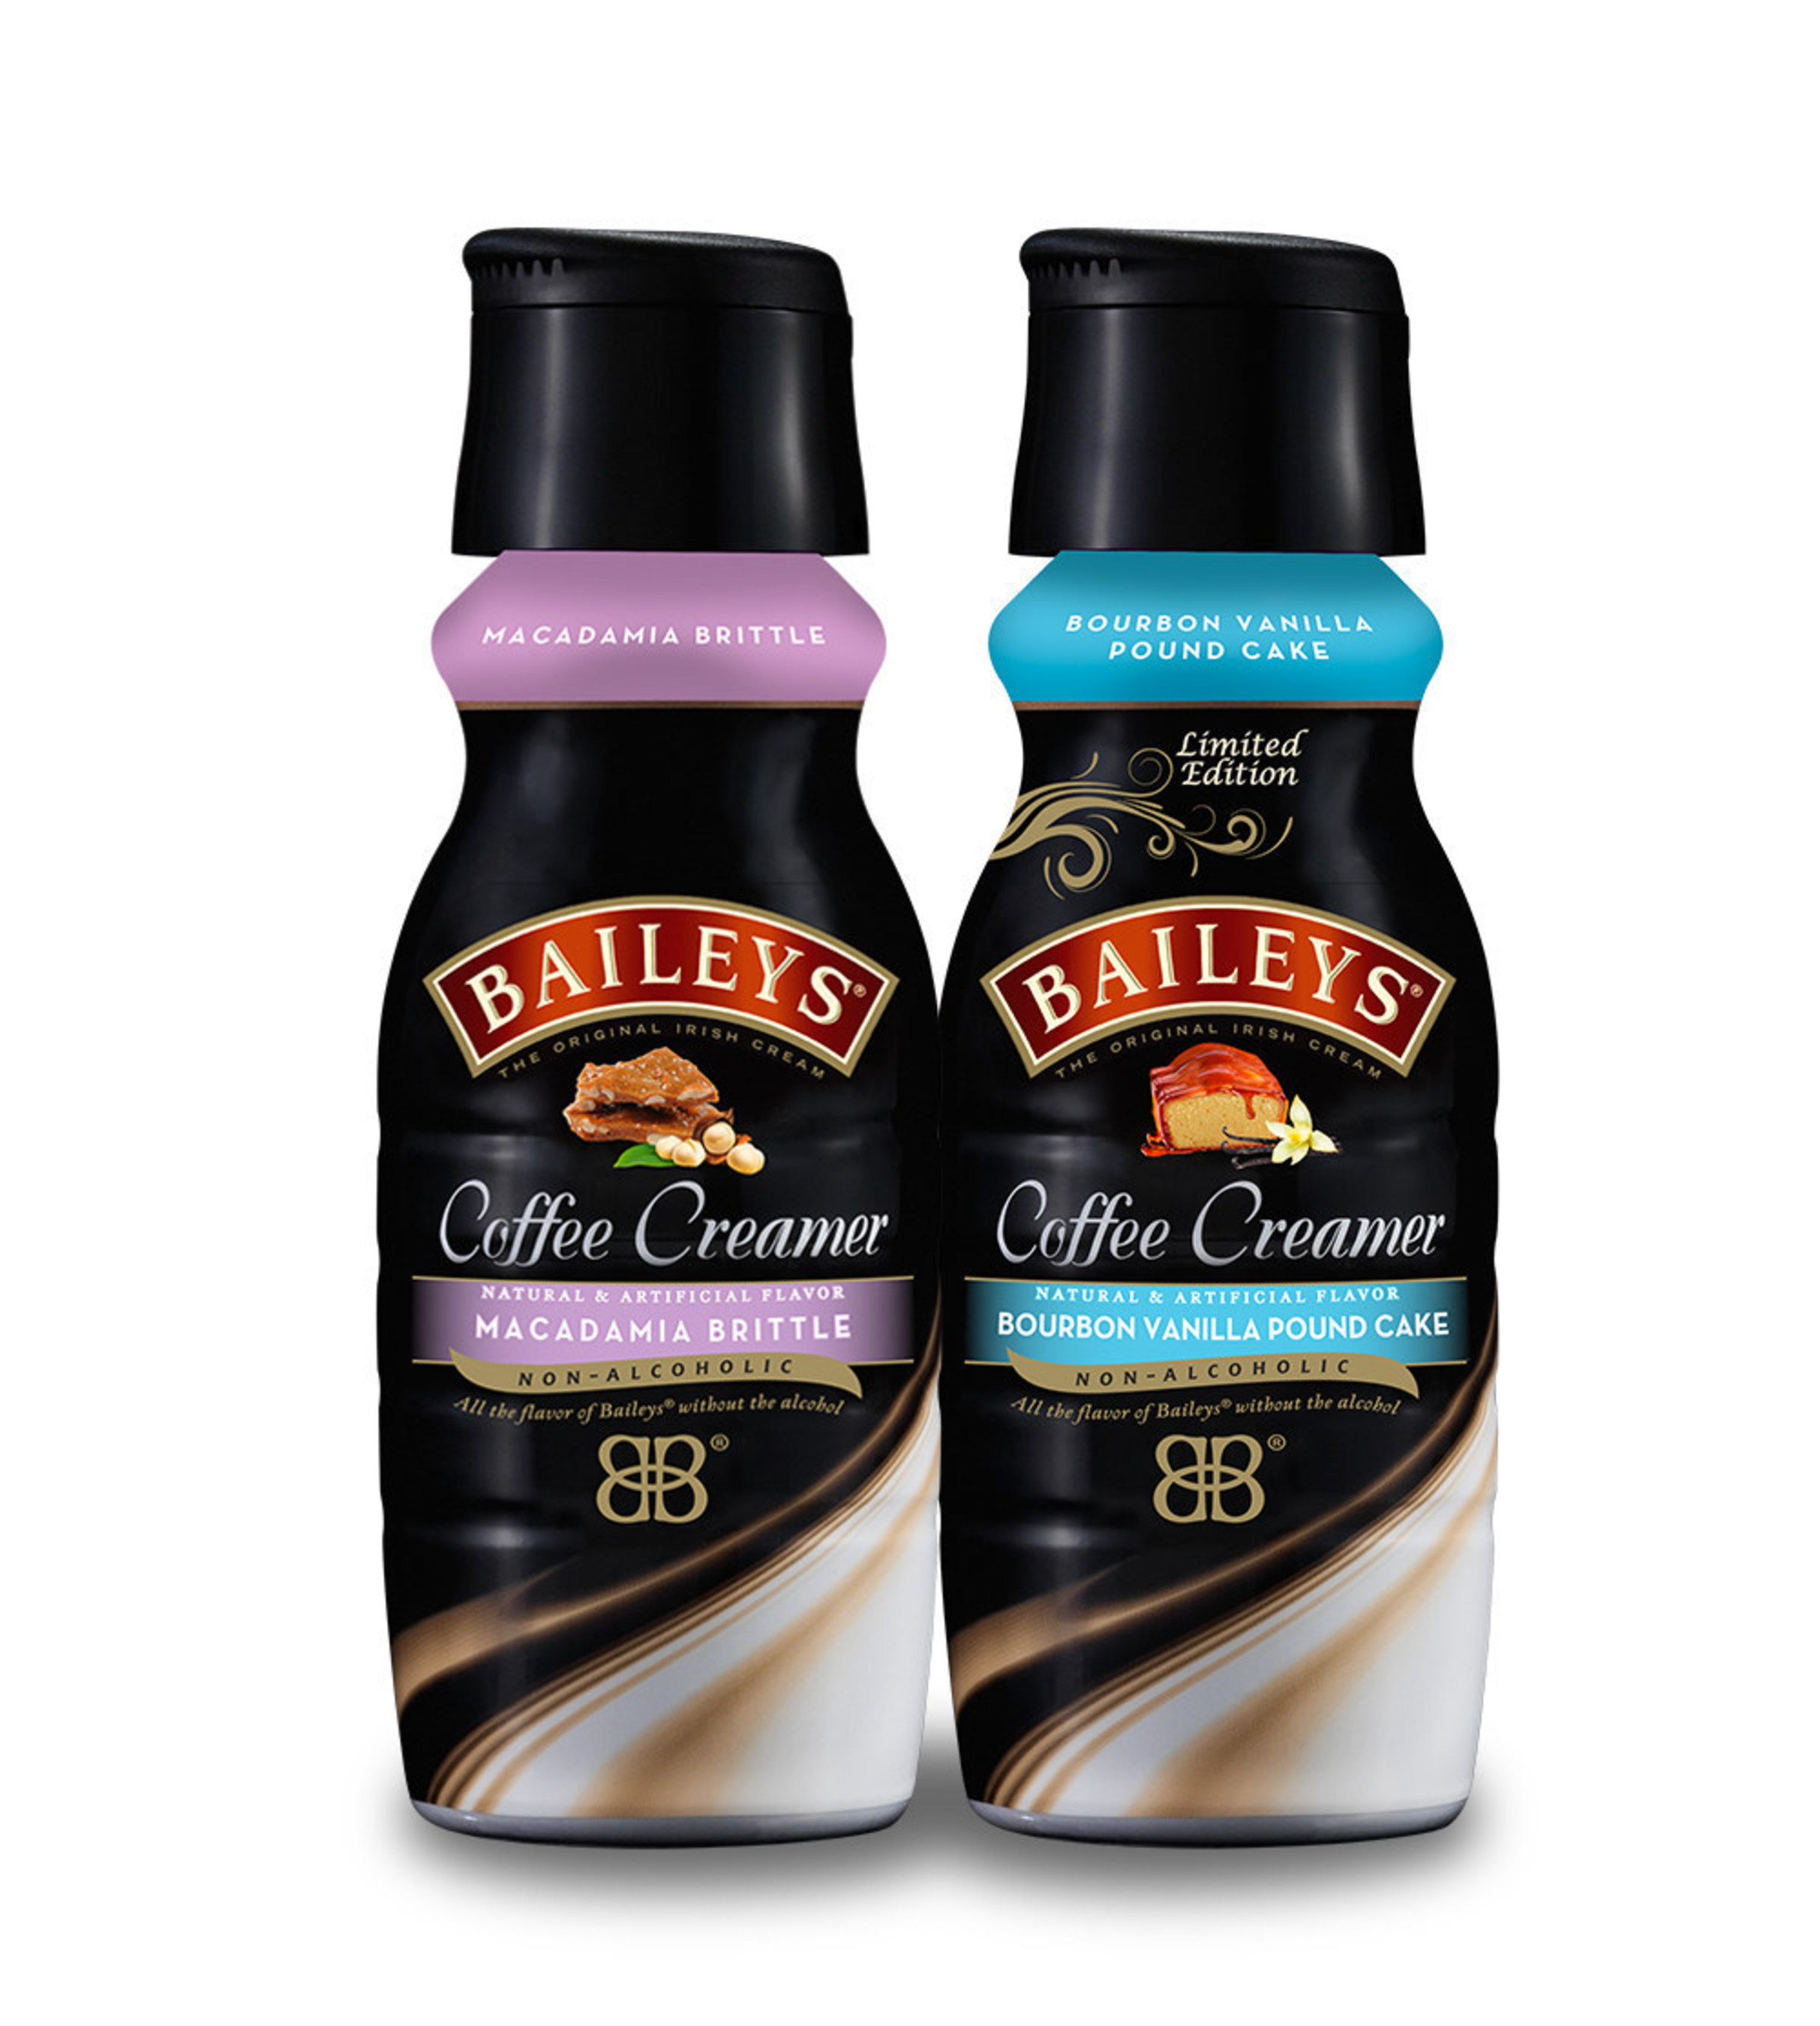 BAILEYS(R) Coffee Creamers Introduces Two New Flavors - Macadamia Brittle and Bourbon Vanilla Pound Cake